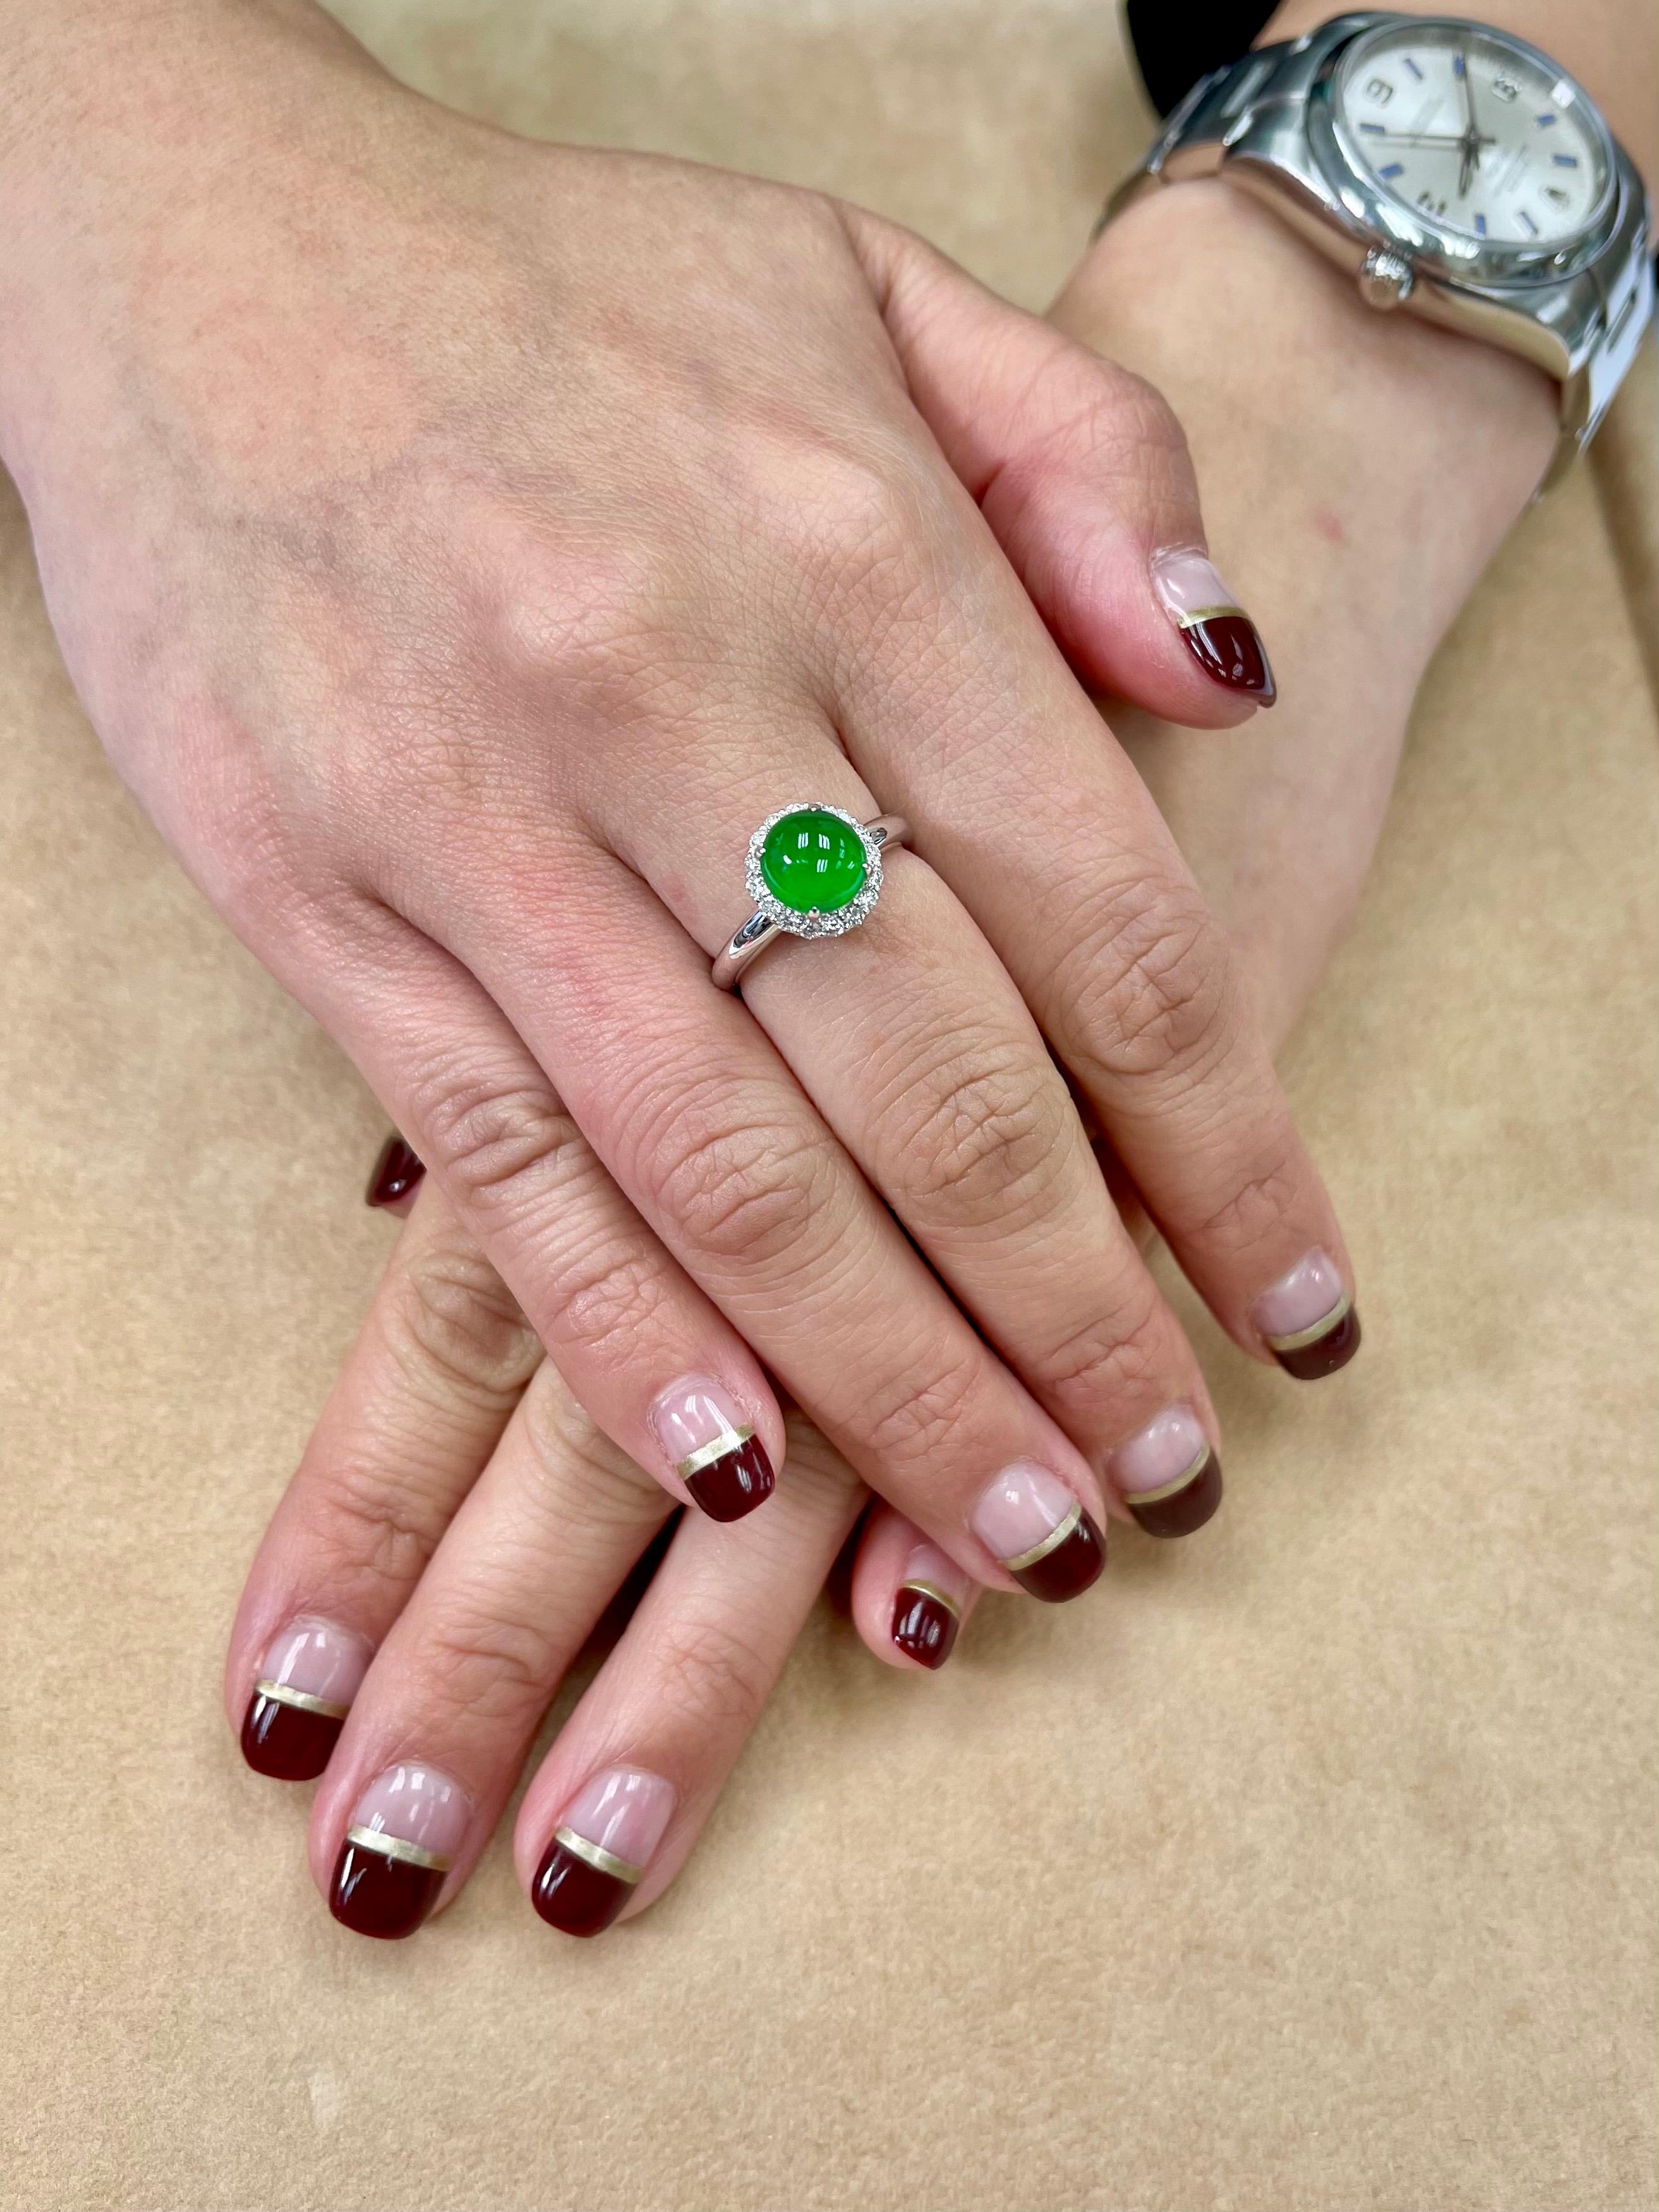 THIS JADE GLOWS! Here is super bright apple green round high domed cabochon jade and diamond ring. It is certified by 2 labs as natural jadeite jade with no treatment or enhancement. The ring is set in 18k white gold and diamonds. There are round